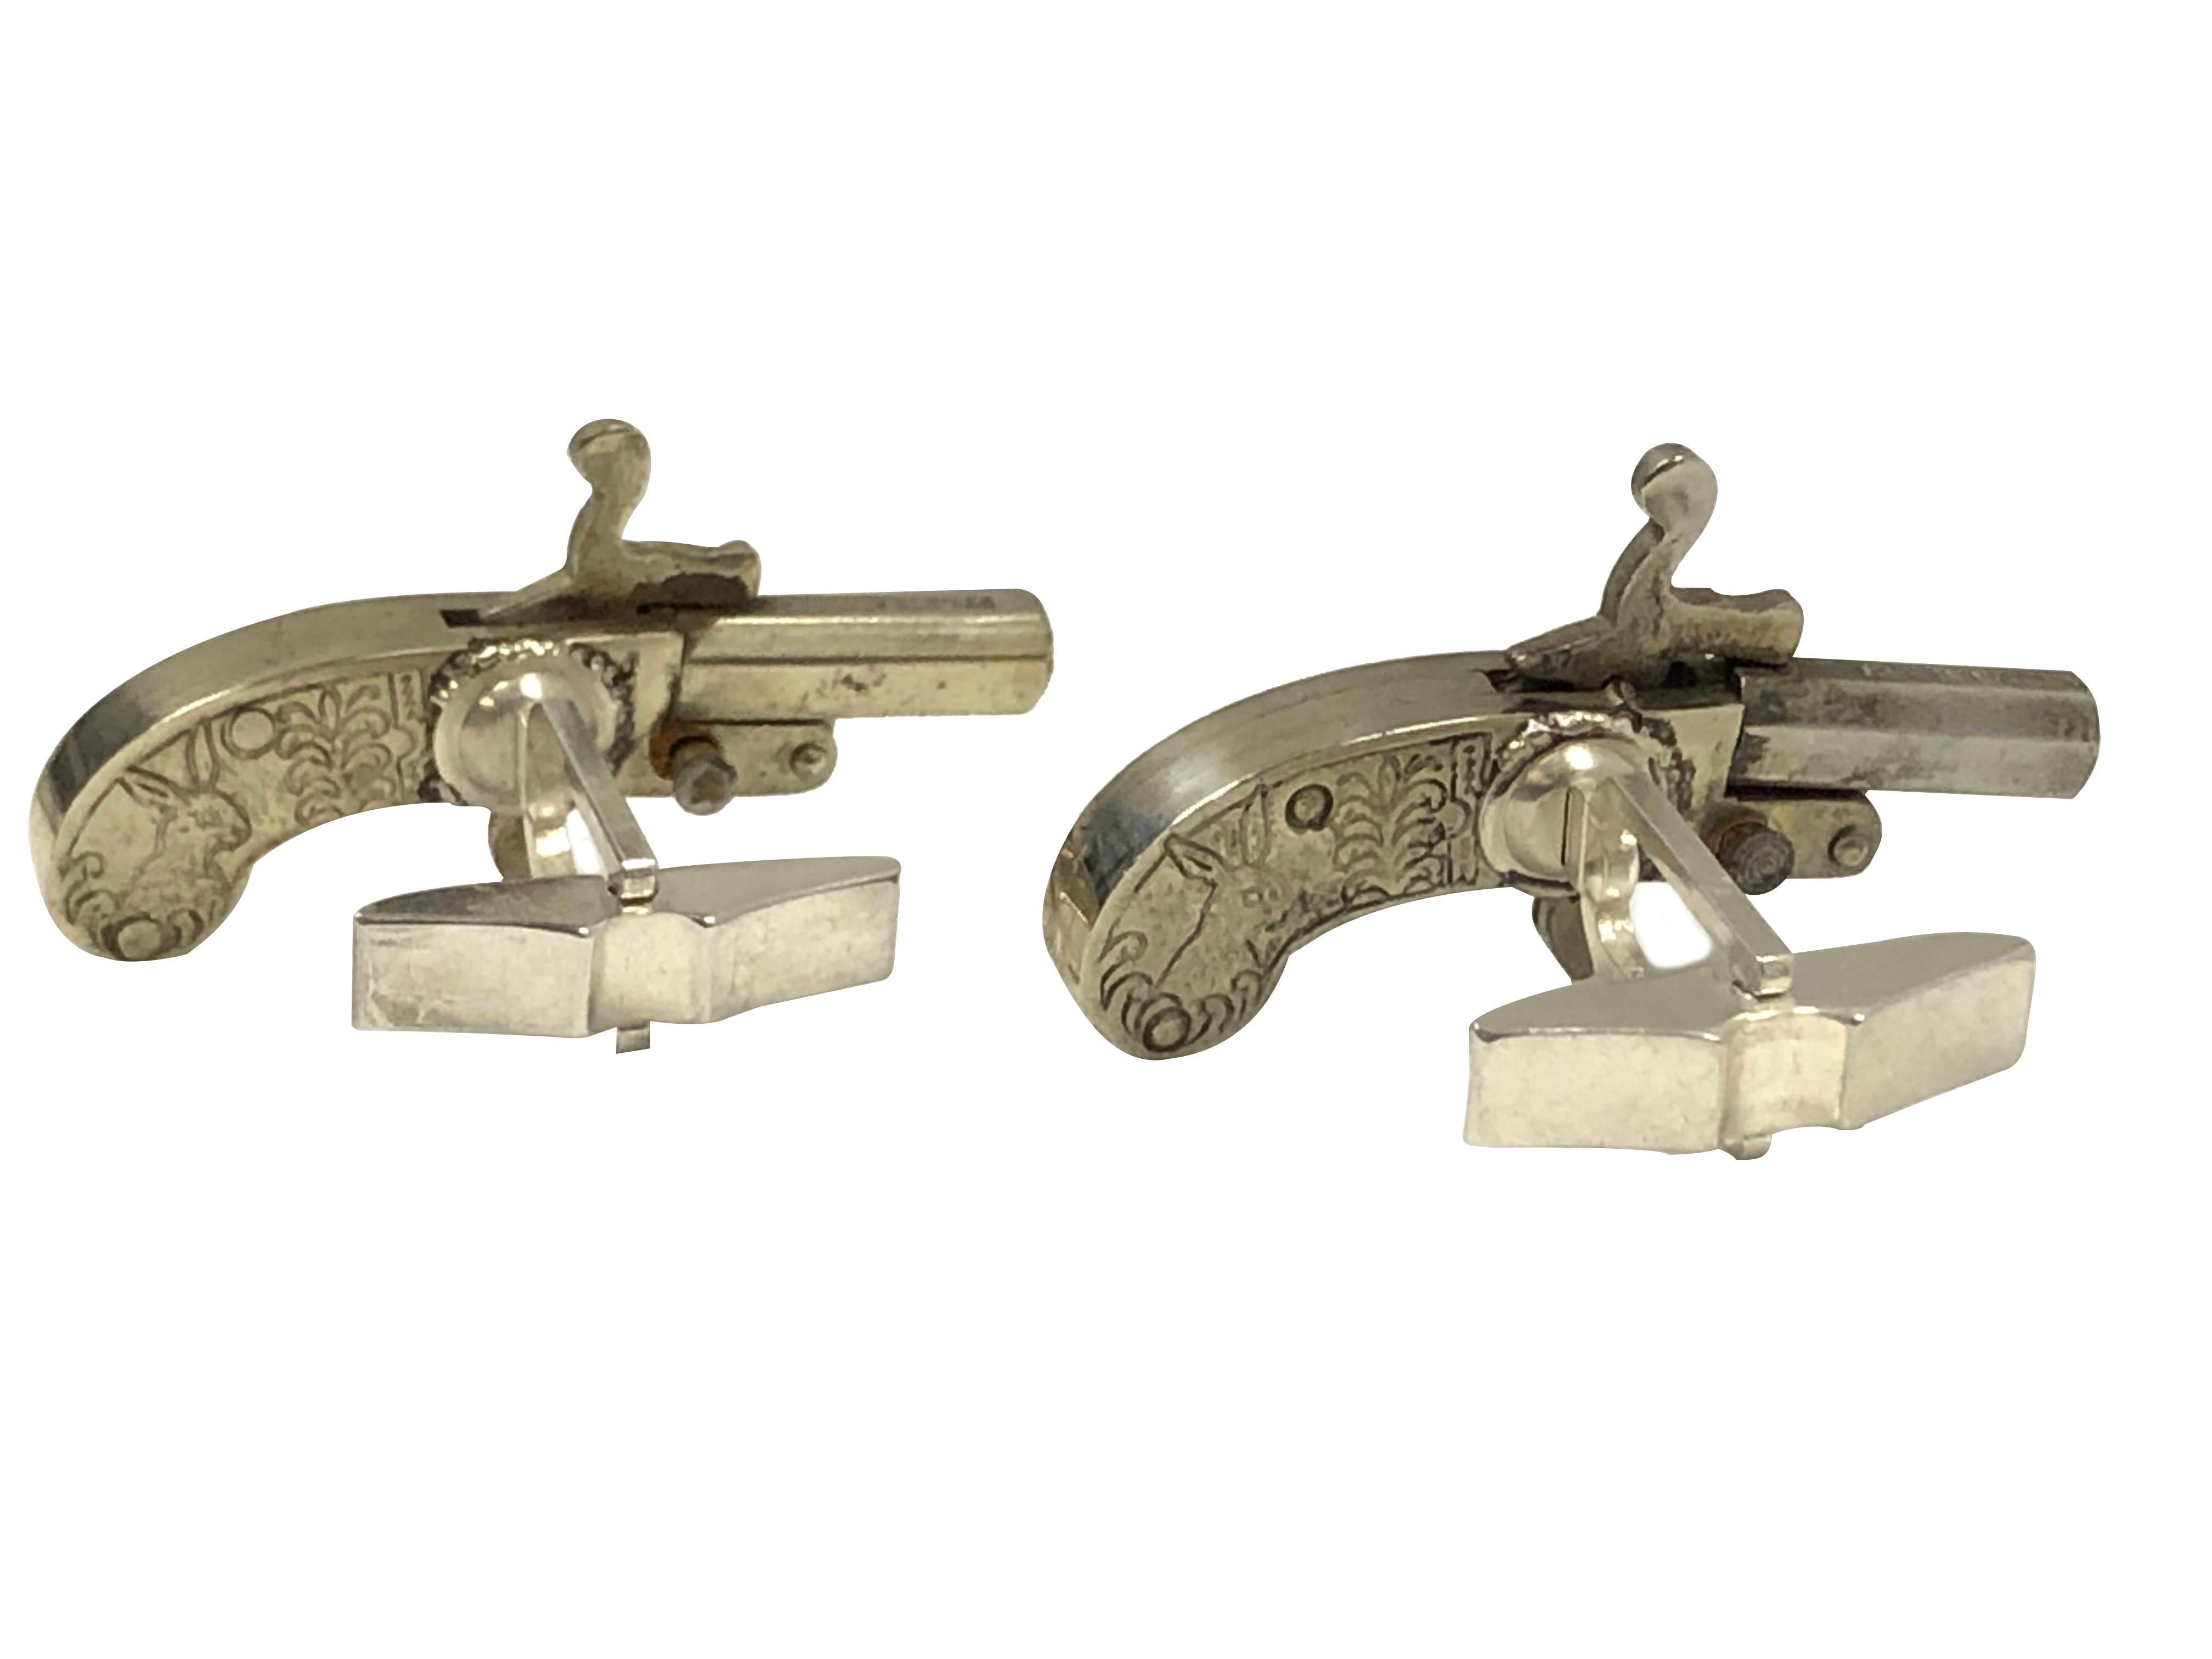 Circa 1930s Austrian Miniature Pistol Cufflinks, Nickle metal, measuring 1 1/2 inch in length, Sterling Silver Toggle backs for easy on and off, all mechanics on these are fully functional as these originally fired a cap.